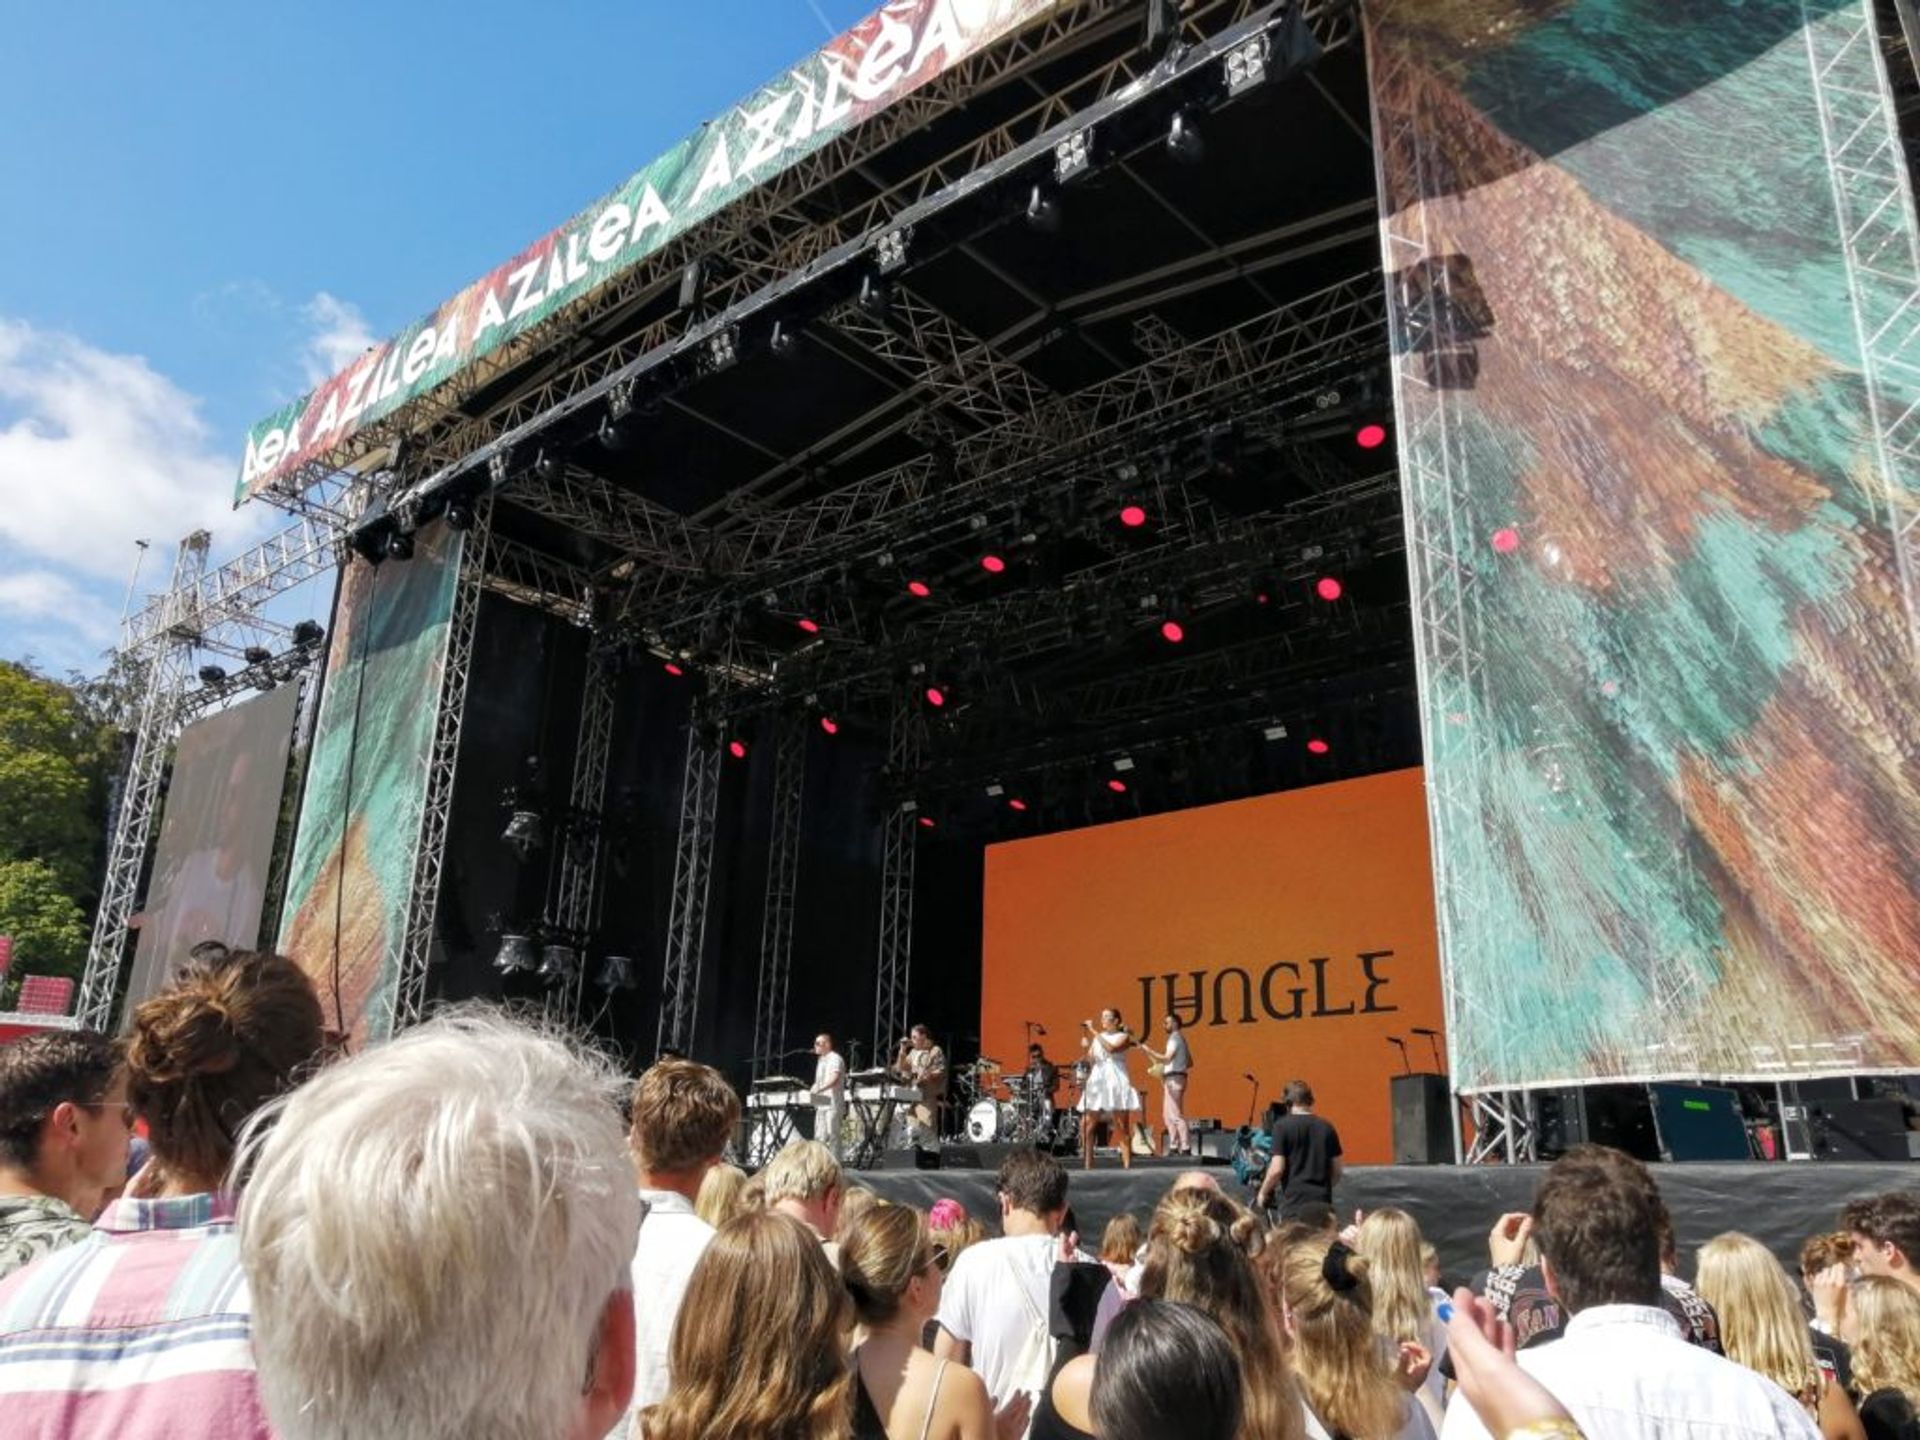 Jungle performing at Way Out West